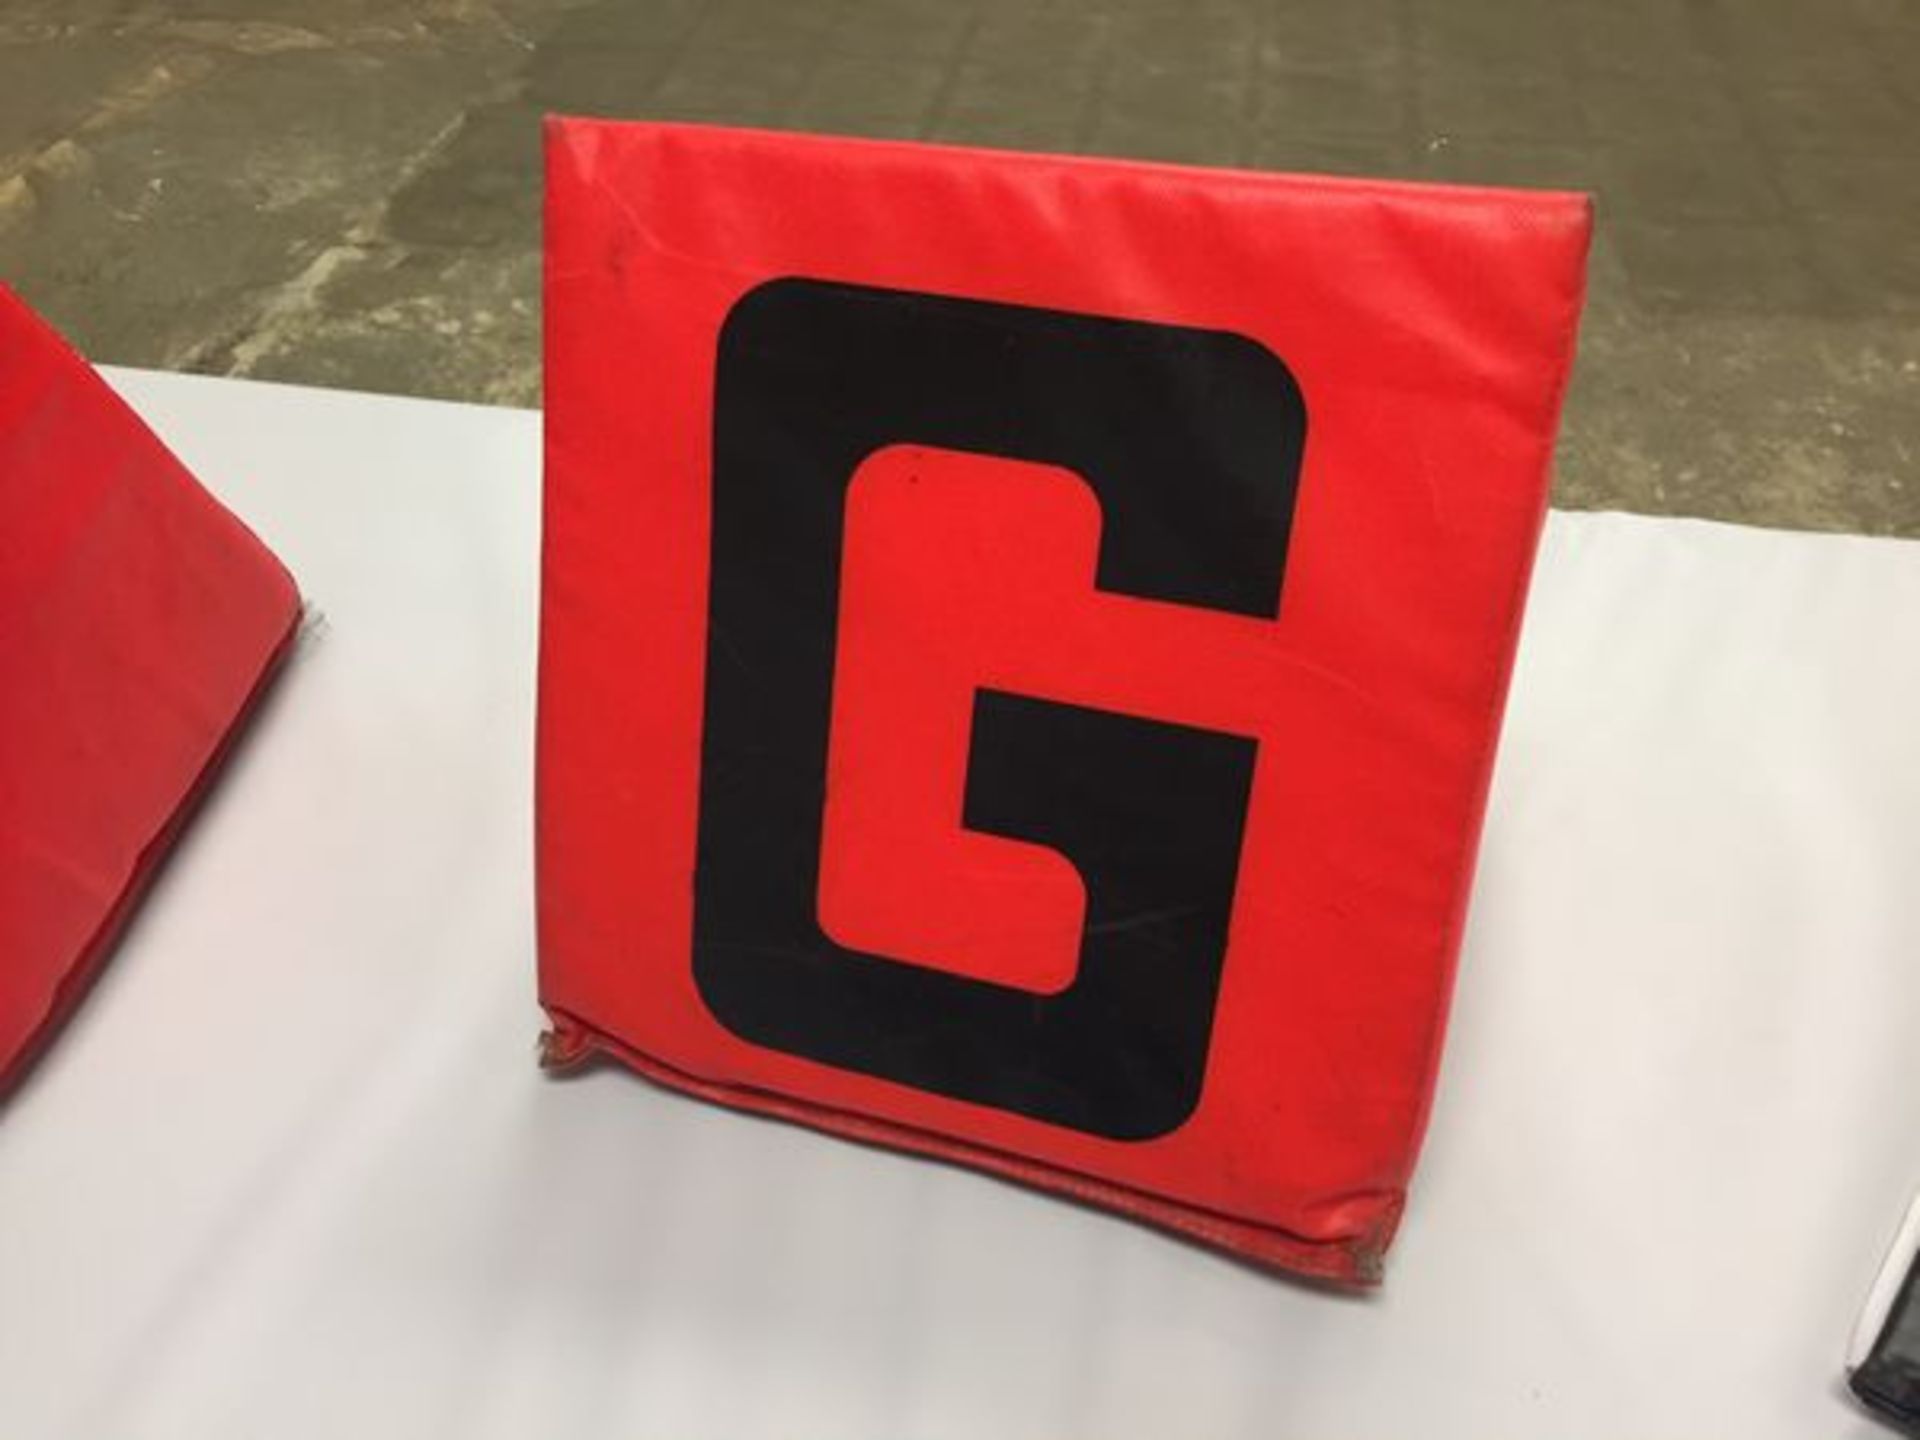 G yard"" Sideline Marker / Game-Used / This item includes Georgia Dome Authentication Tag